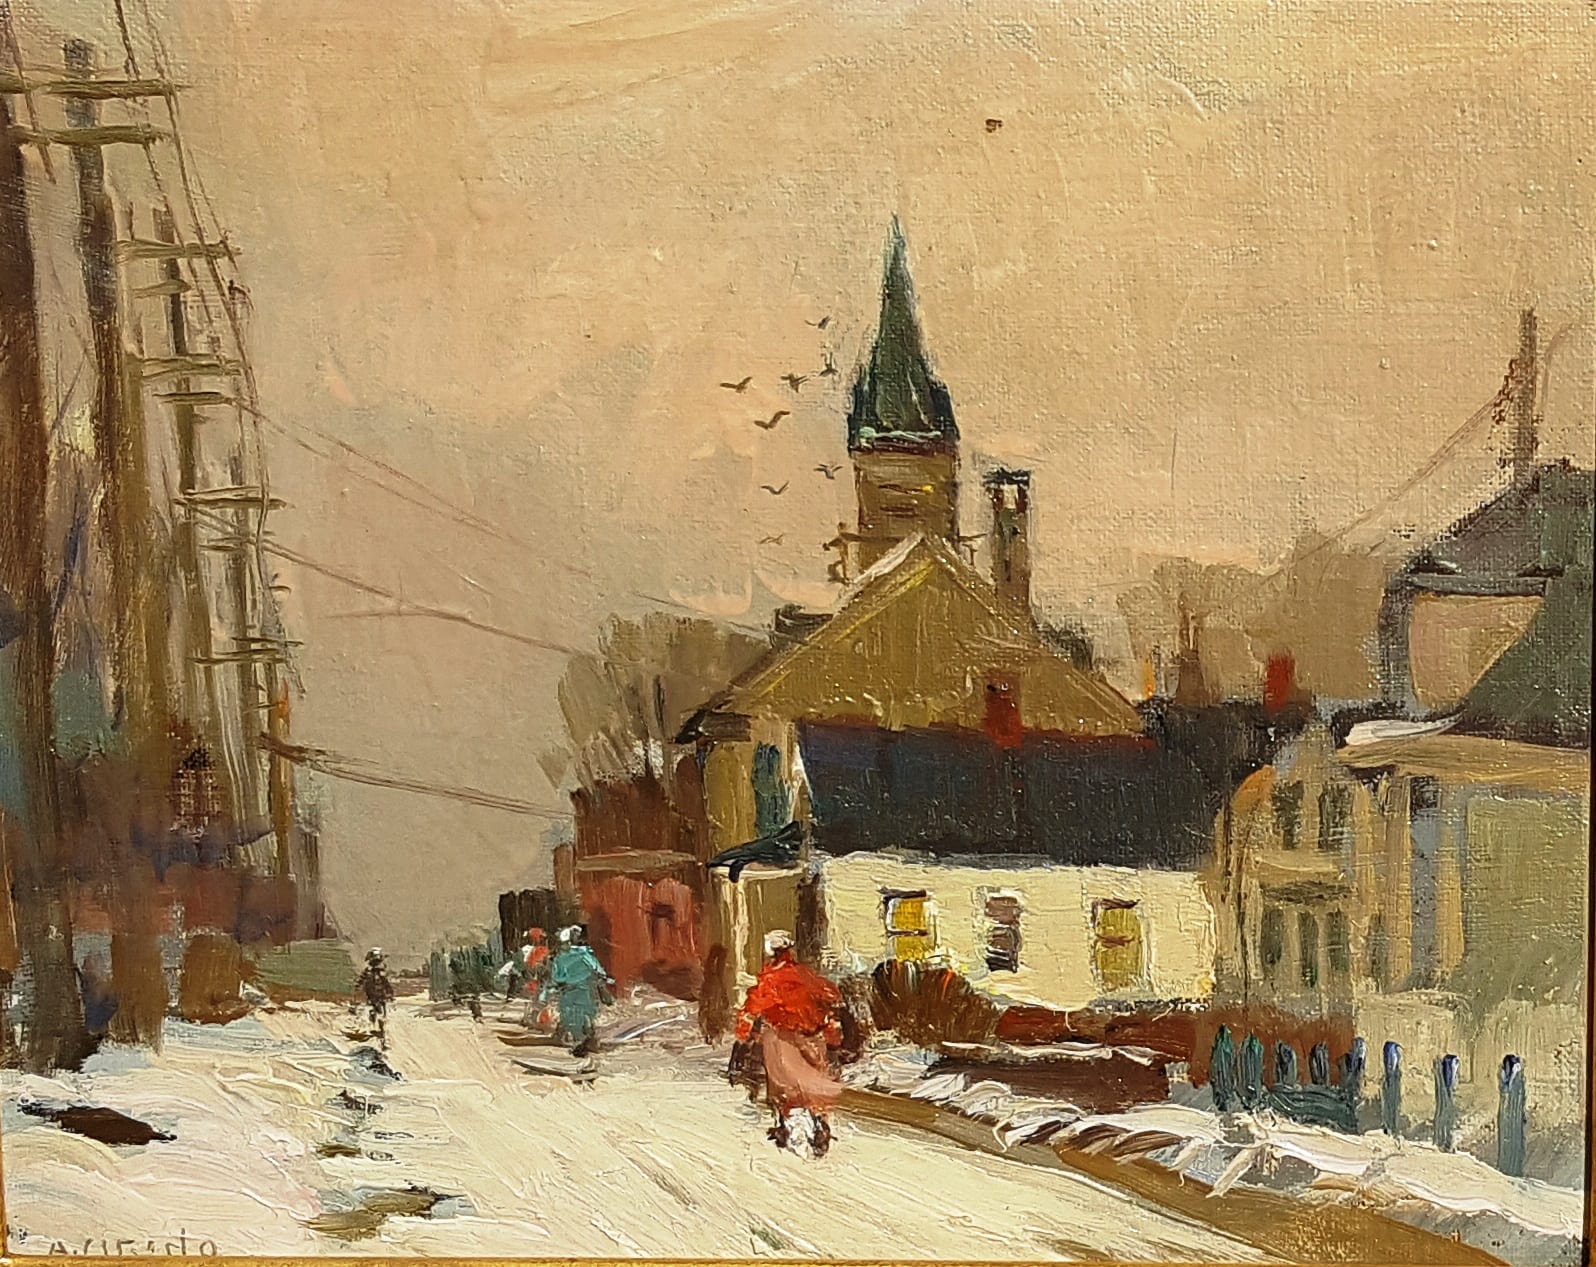 Antonio Cirino. New England Street in Winter. A small chapel in front of a snowy street with pedestrians. A flow of birds begins flight above and behind the steeple.